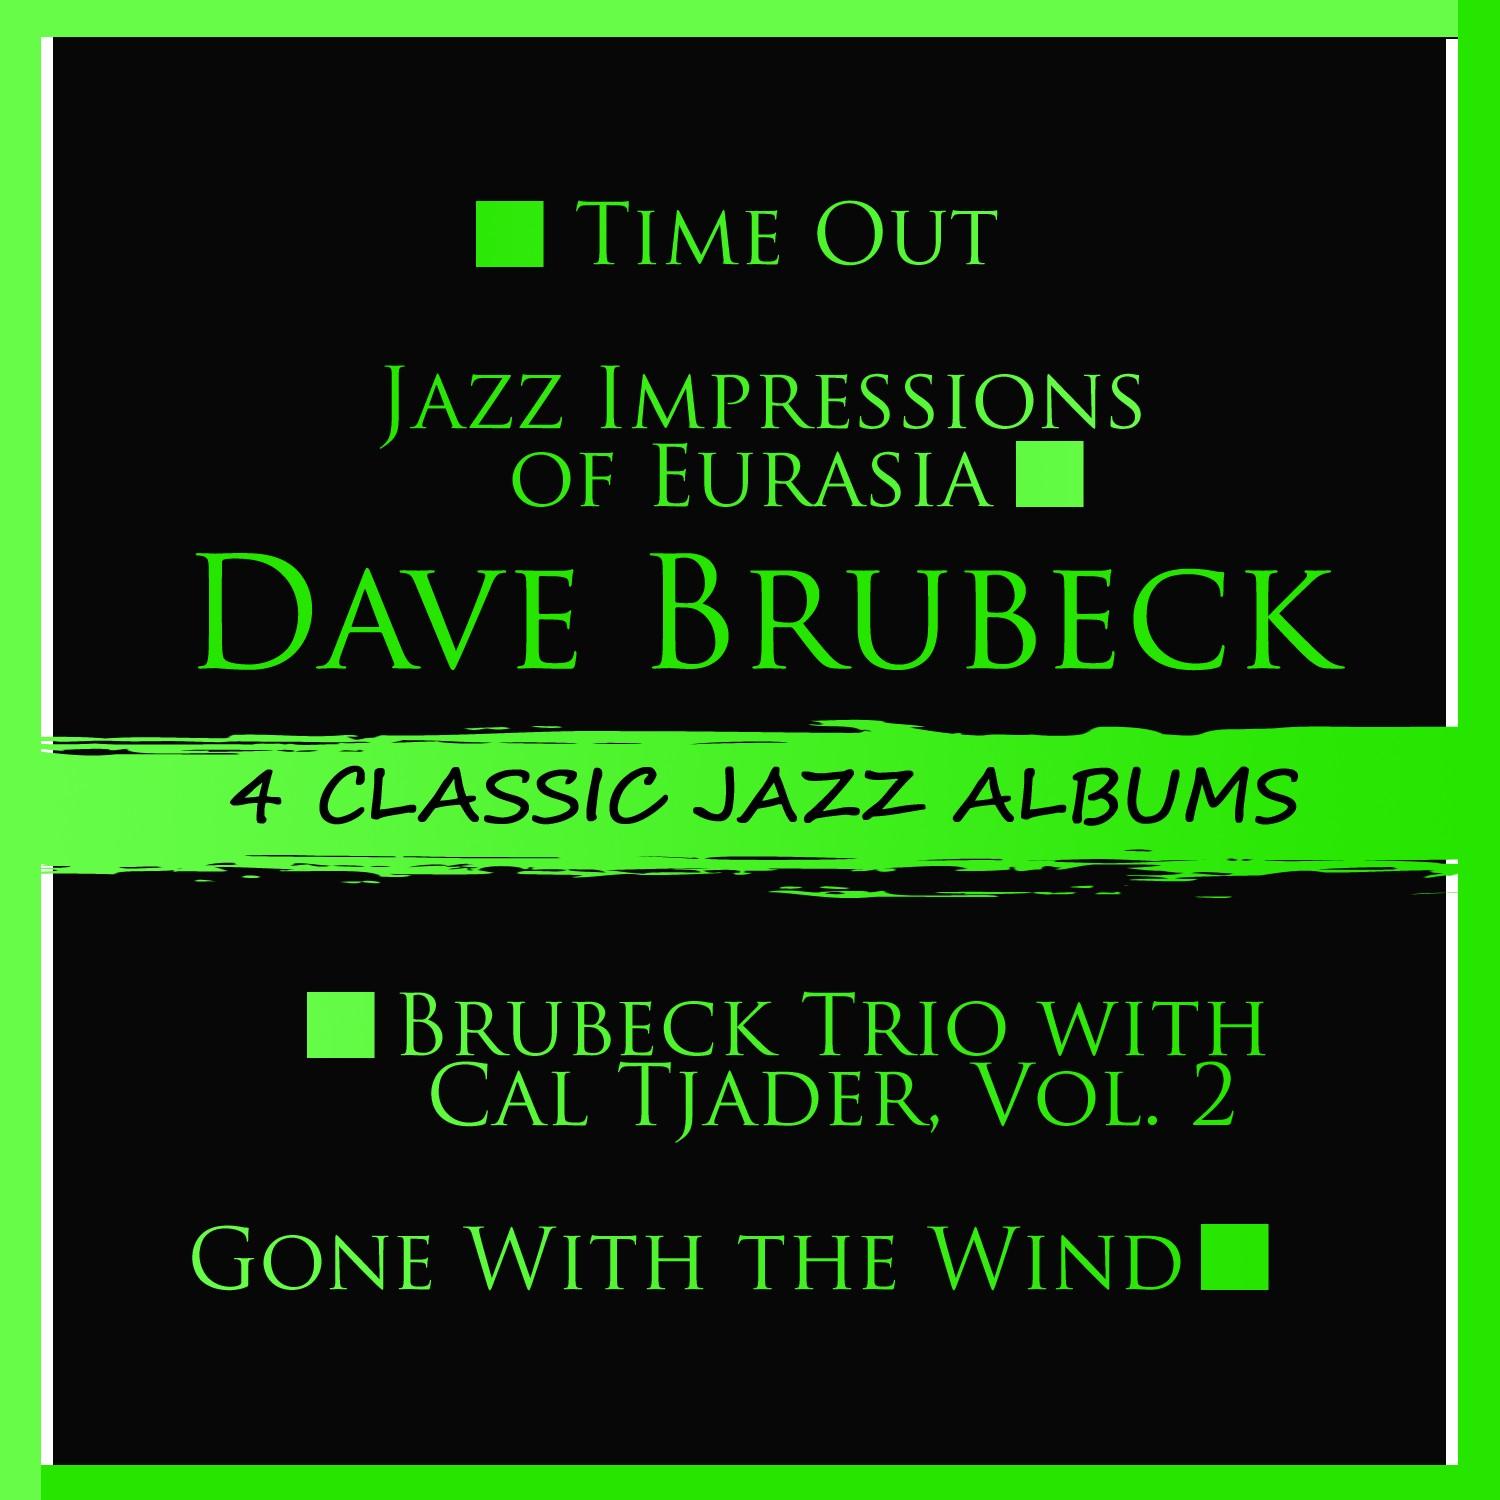 4 Classic Jazz Albums: Time Out / Jazz Impressions of Eurasia / Brubeck Trio with Cal Tjader, Vol. 2 / Gone with the Wind